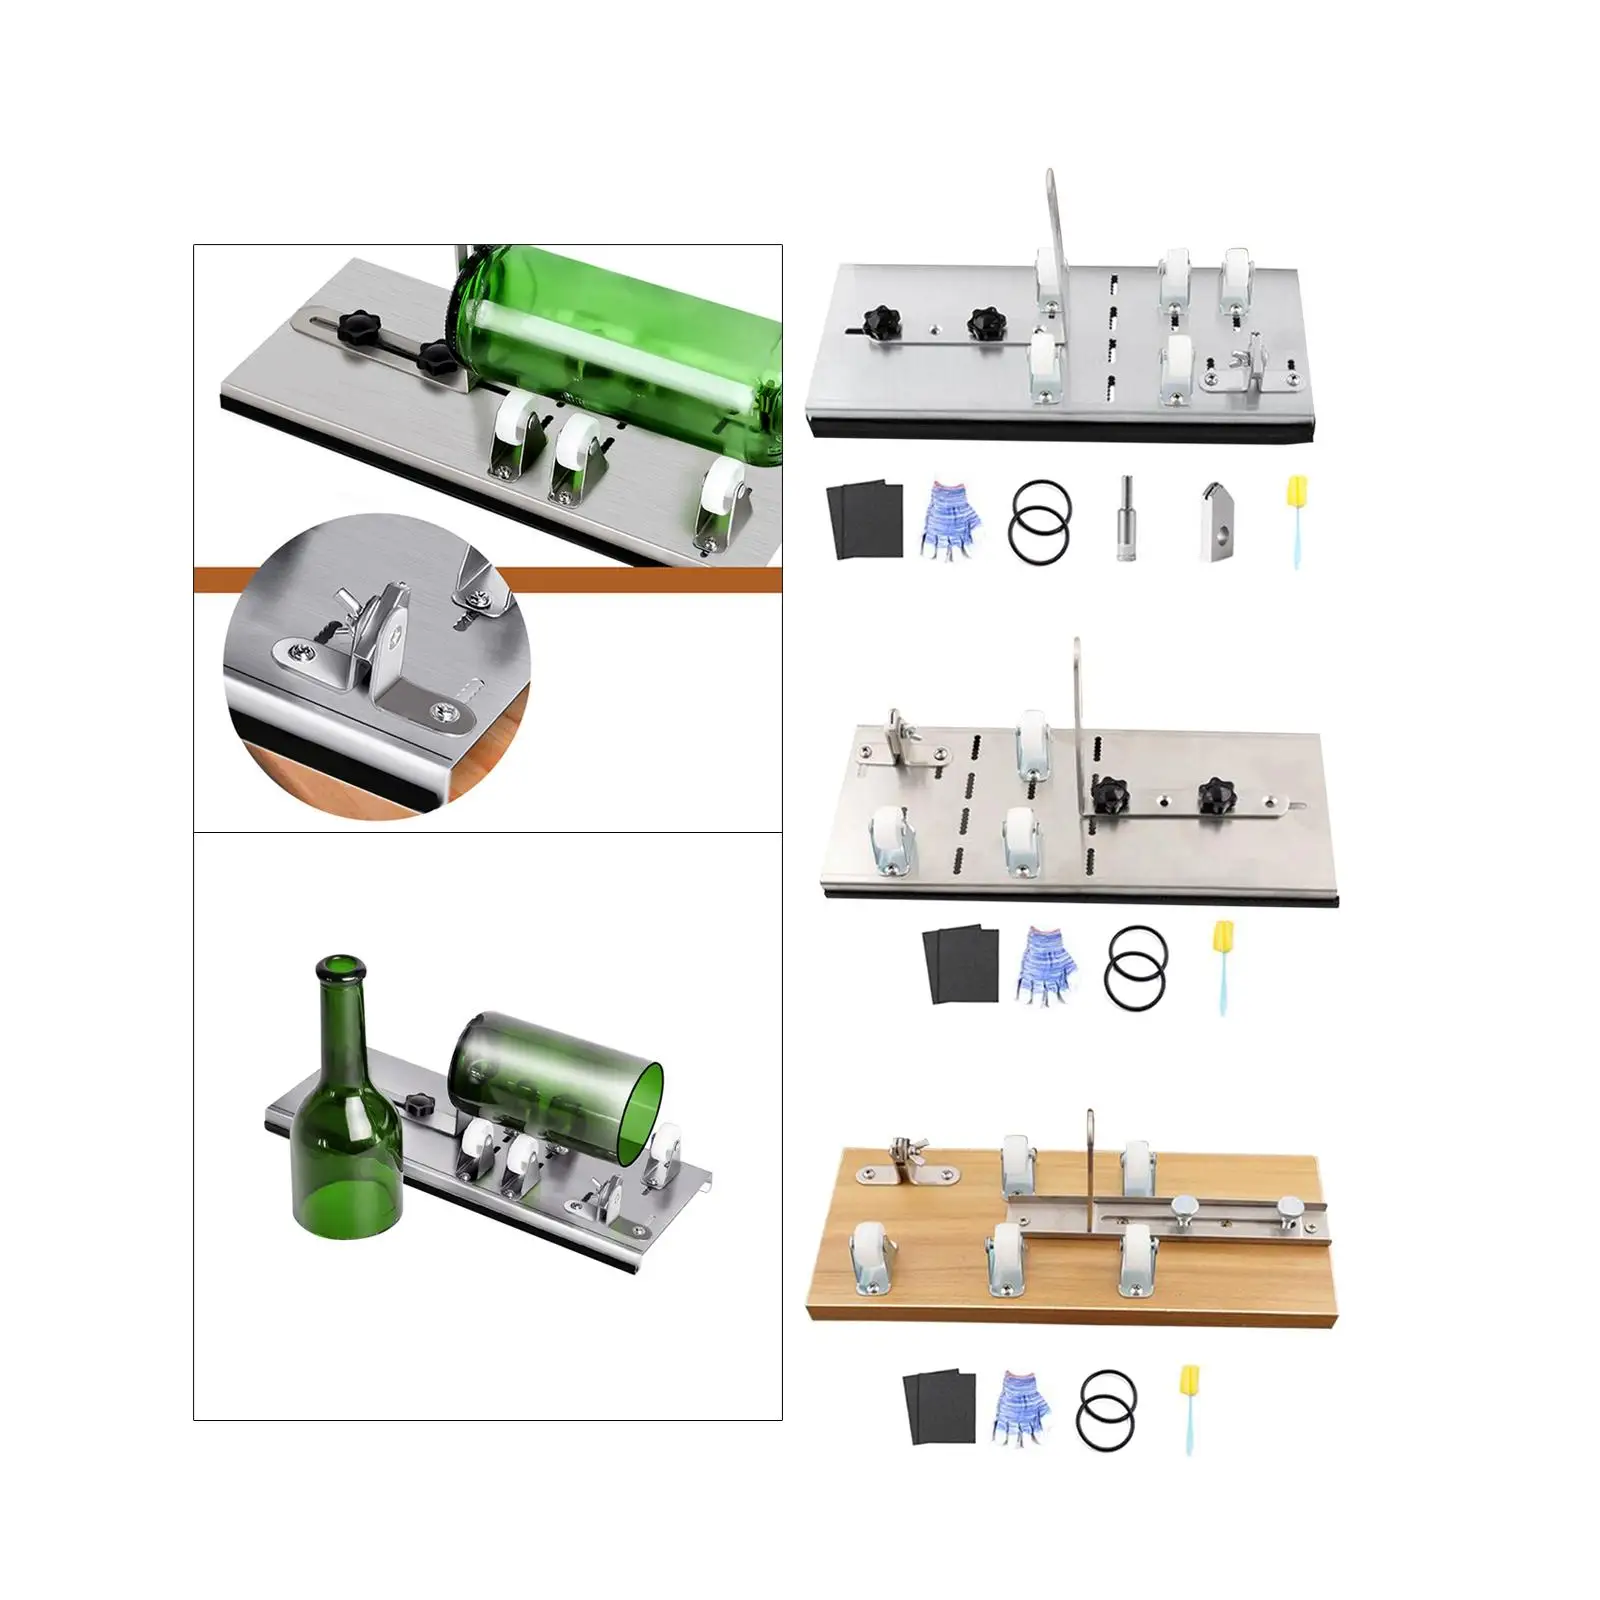 Glass Bottle Cutter Upgraded Sturdy Cutting Machine for Making Home Ornament